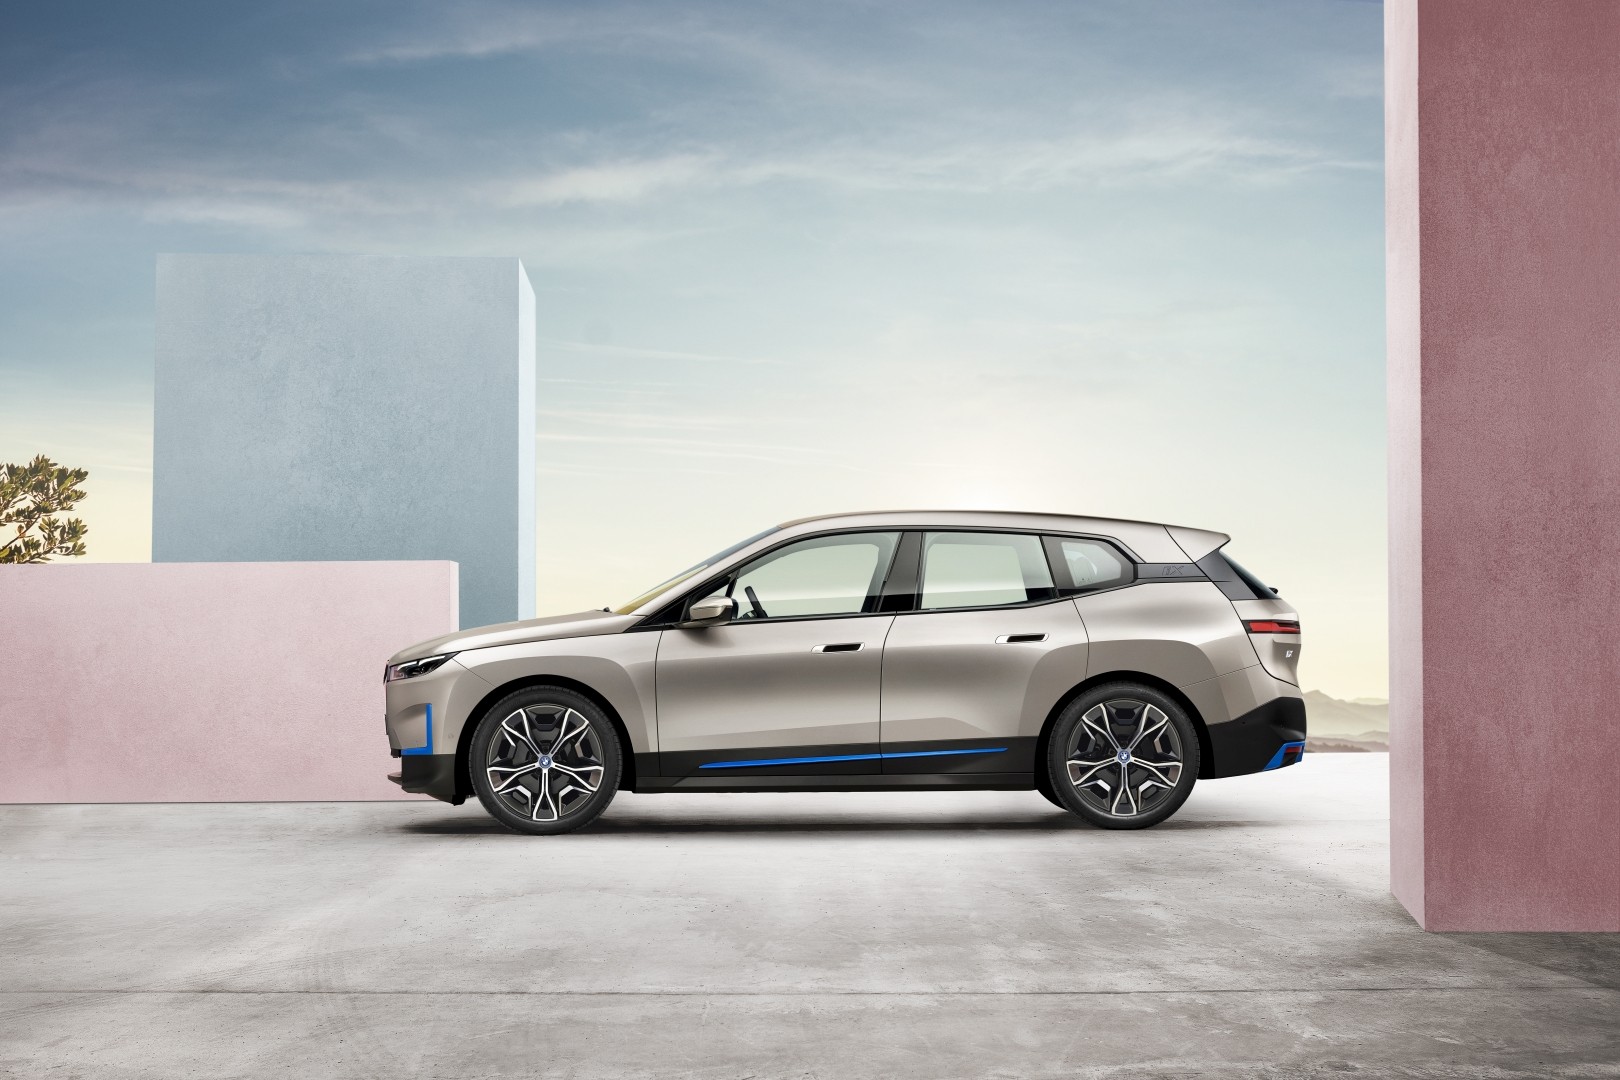 BMW iX electric SUV specifications revealed, offers up to 600km range